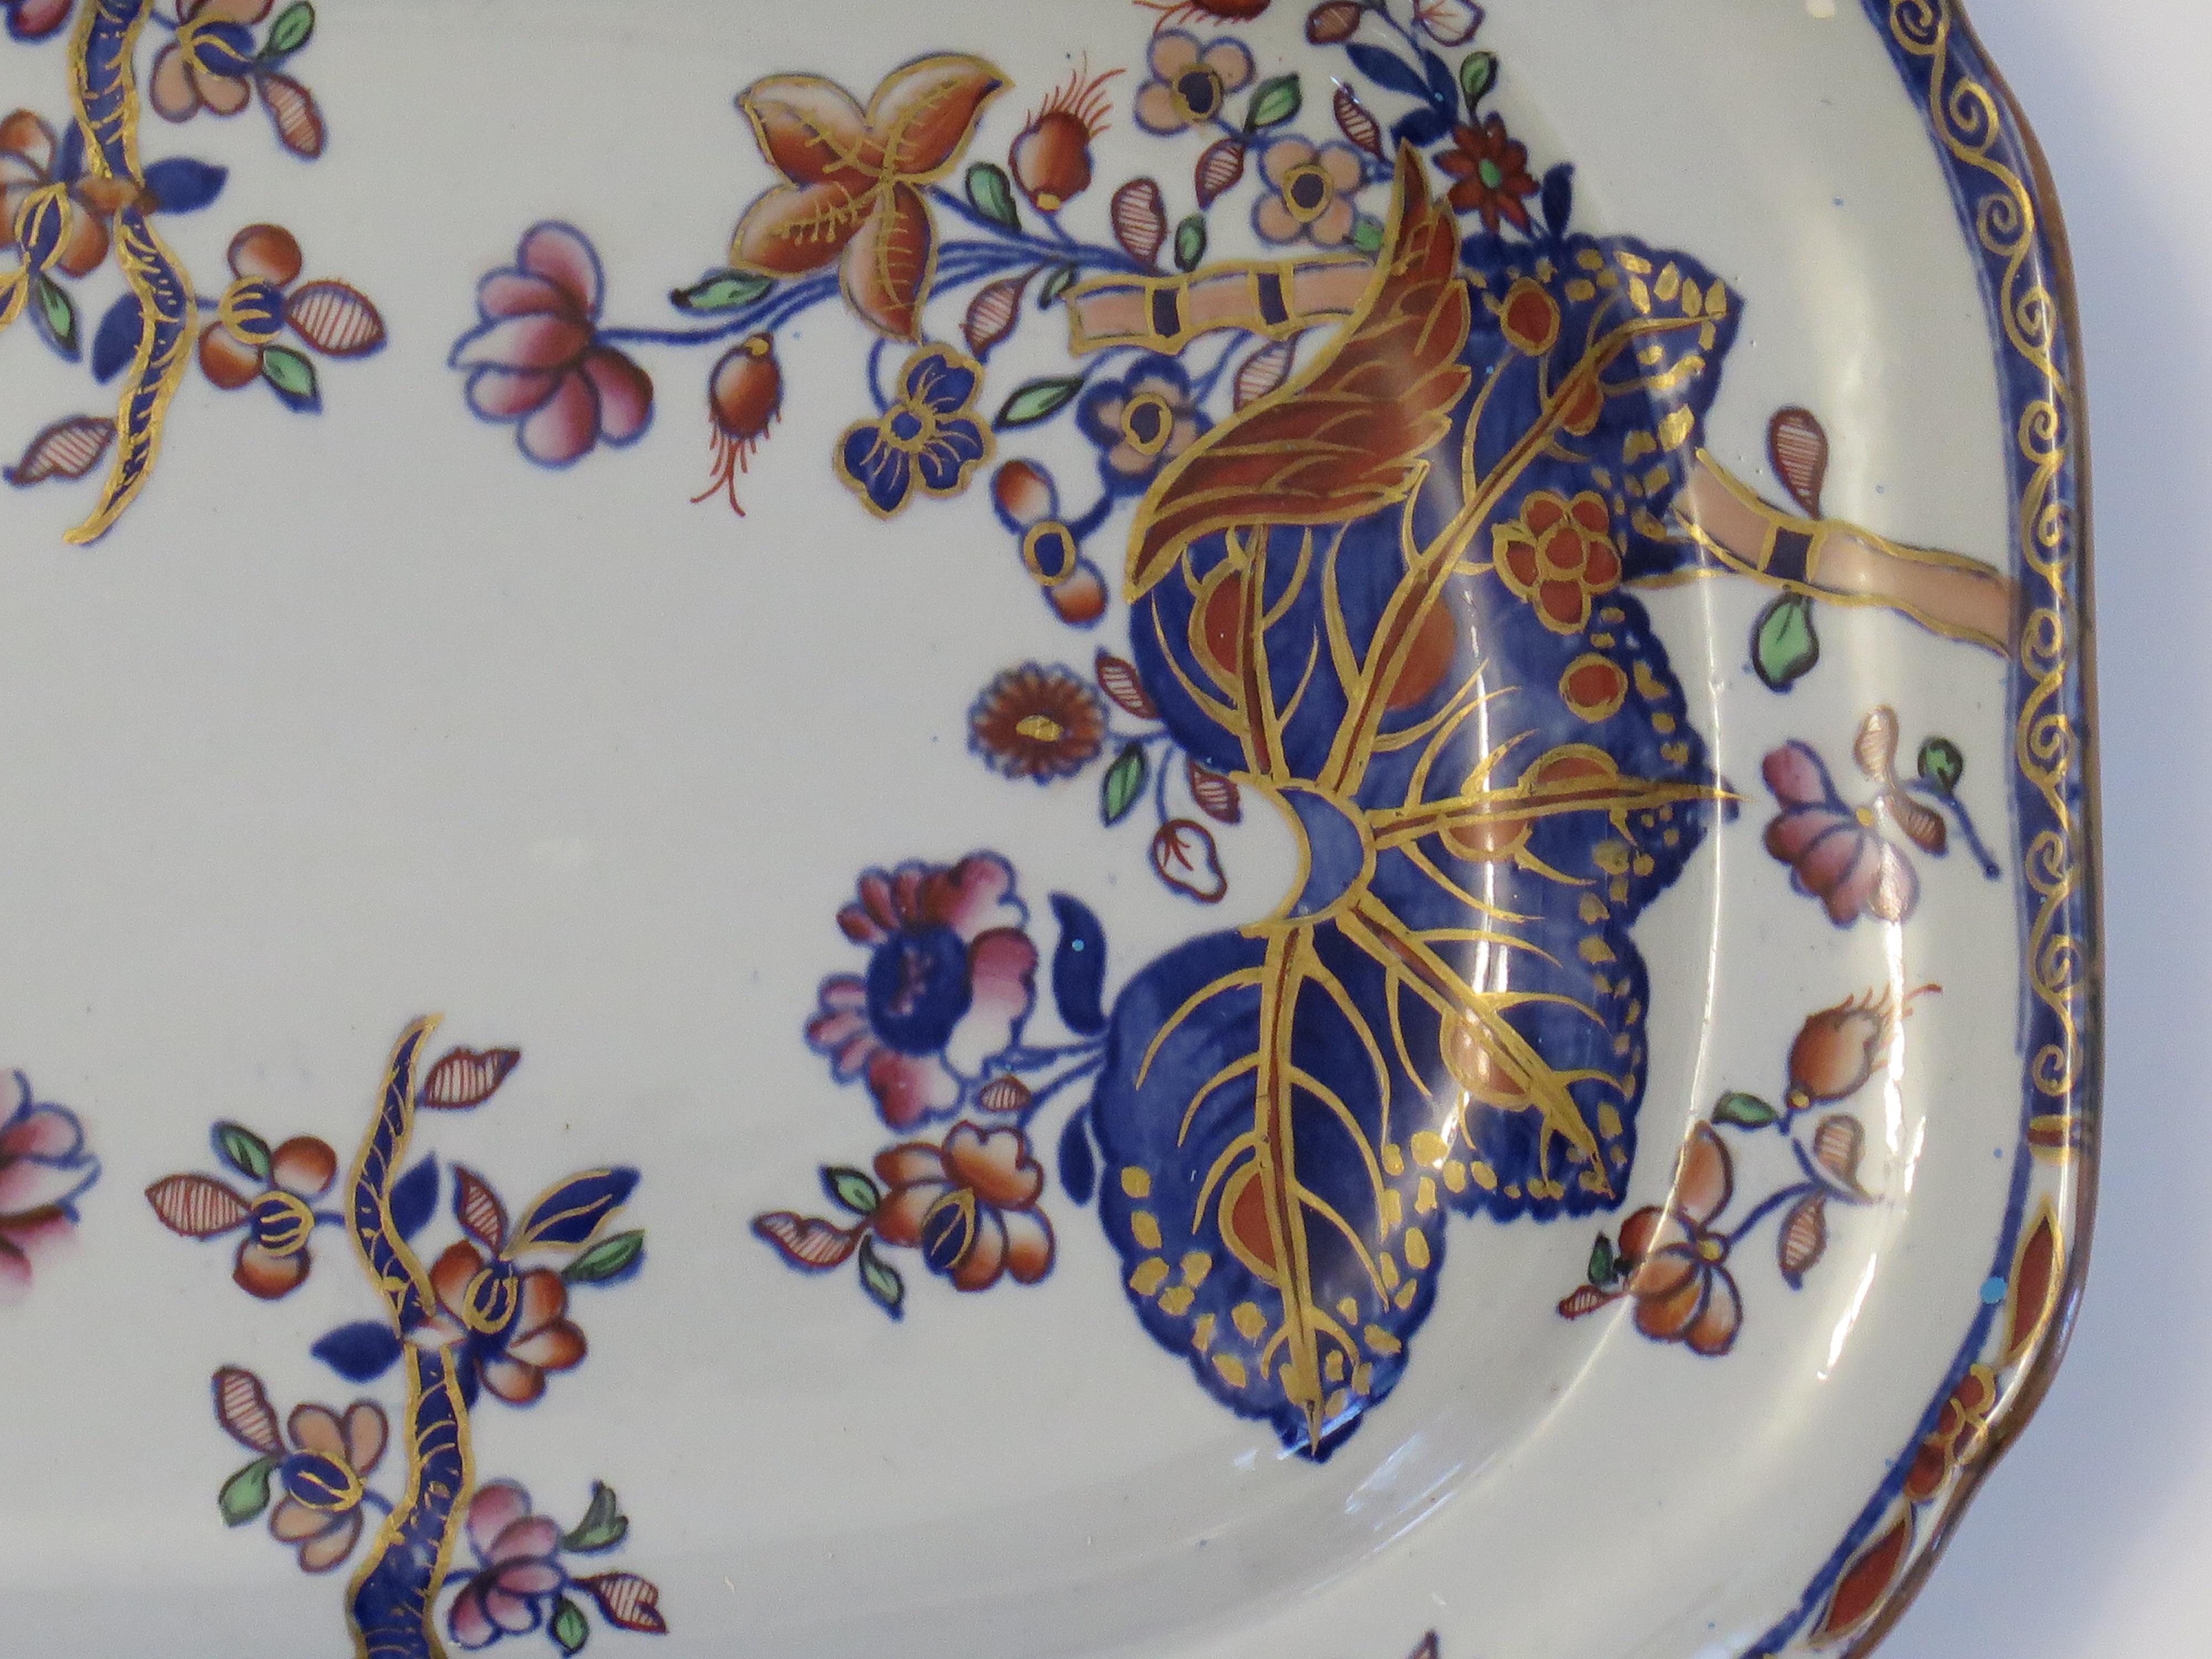 Ironstone Copeland Stone China Dish or Platter in Tobacco Leaf Pattern No 2061, Mid 19th C